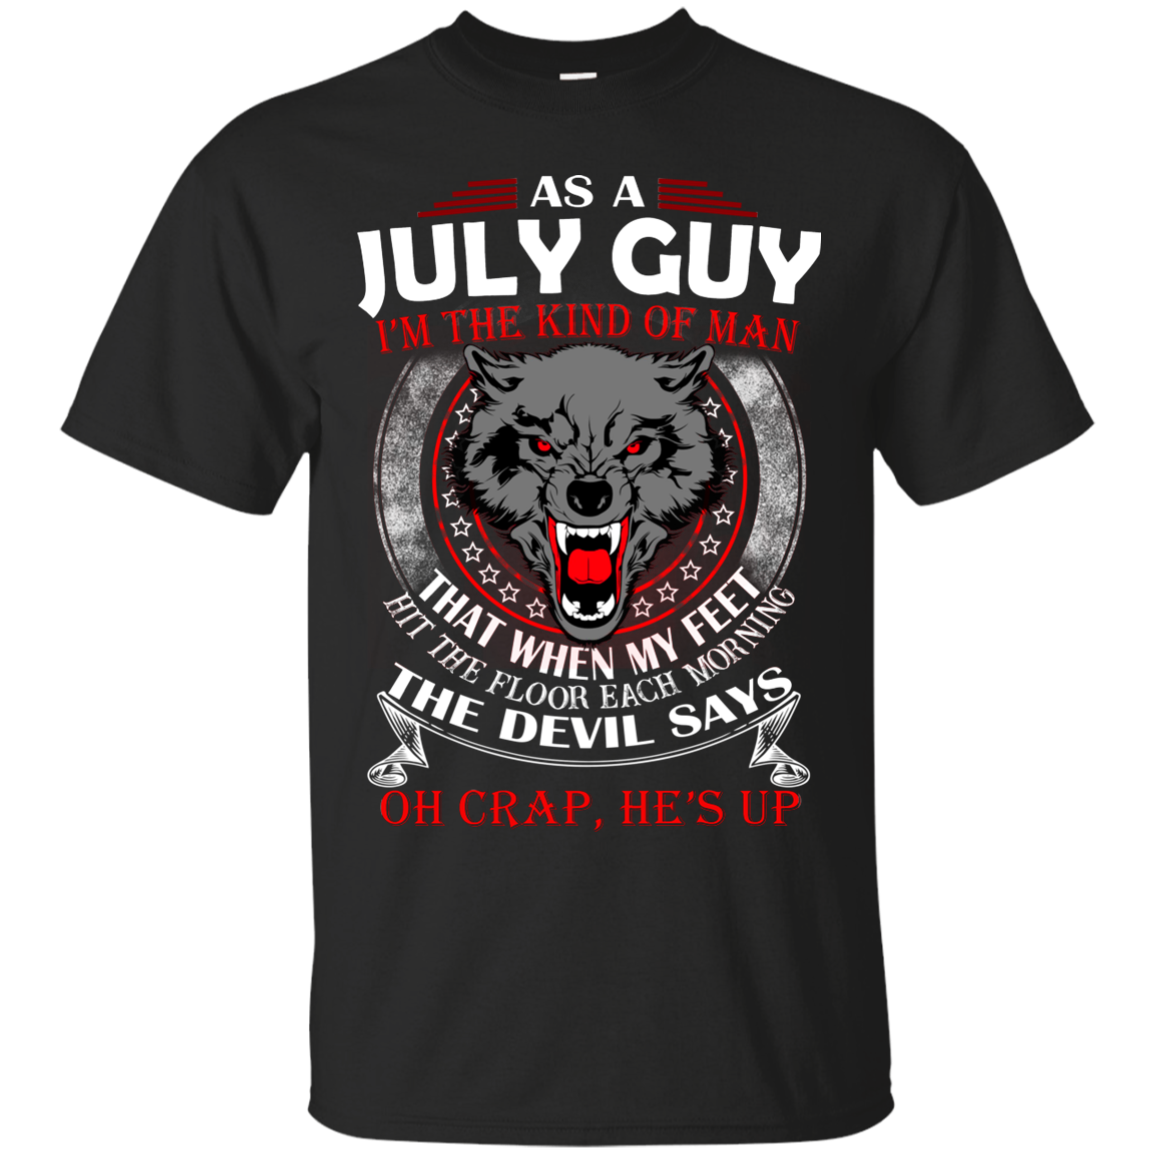 As A July Guy - The Devil Says Oh Crap, He's Up Shirt, Hoodie